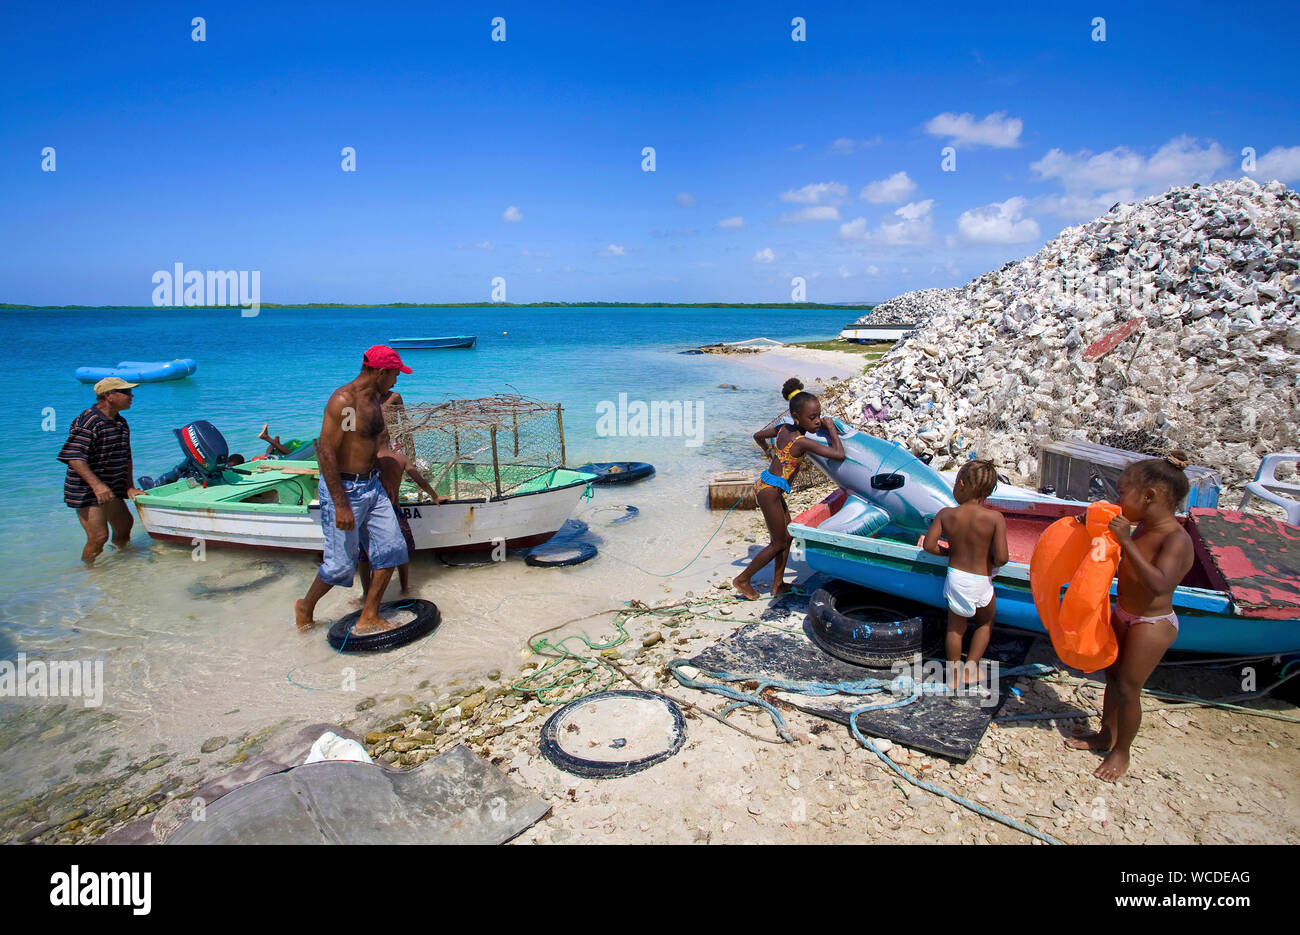 Fishermen at west coast, stacked empty shells of Queen conches (Strombus gigas) at beach, former delicacy, now protected, Bonaire, Netherland Antilles Stock Photo